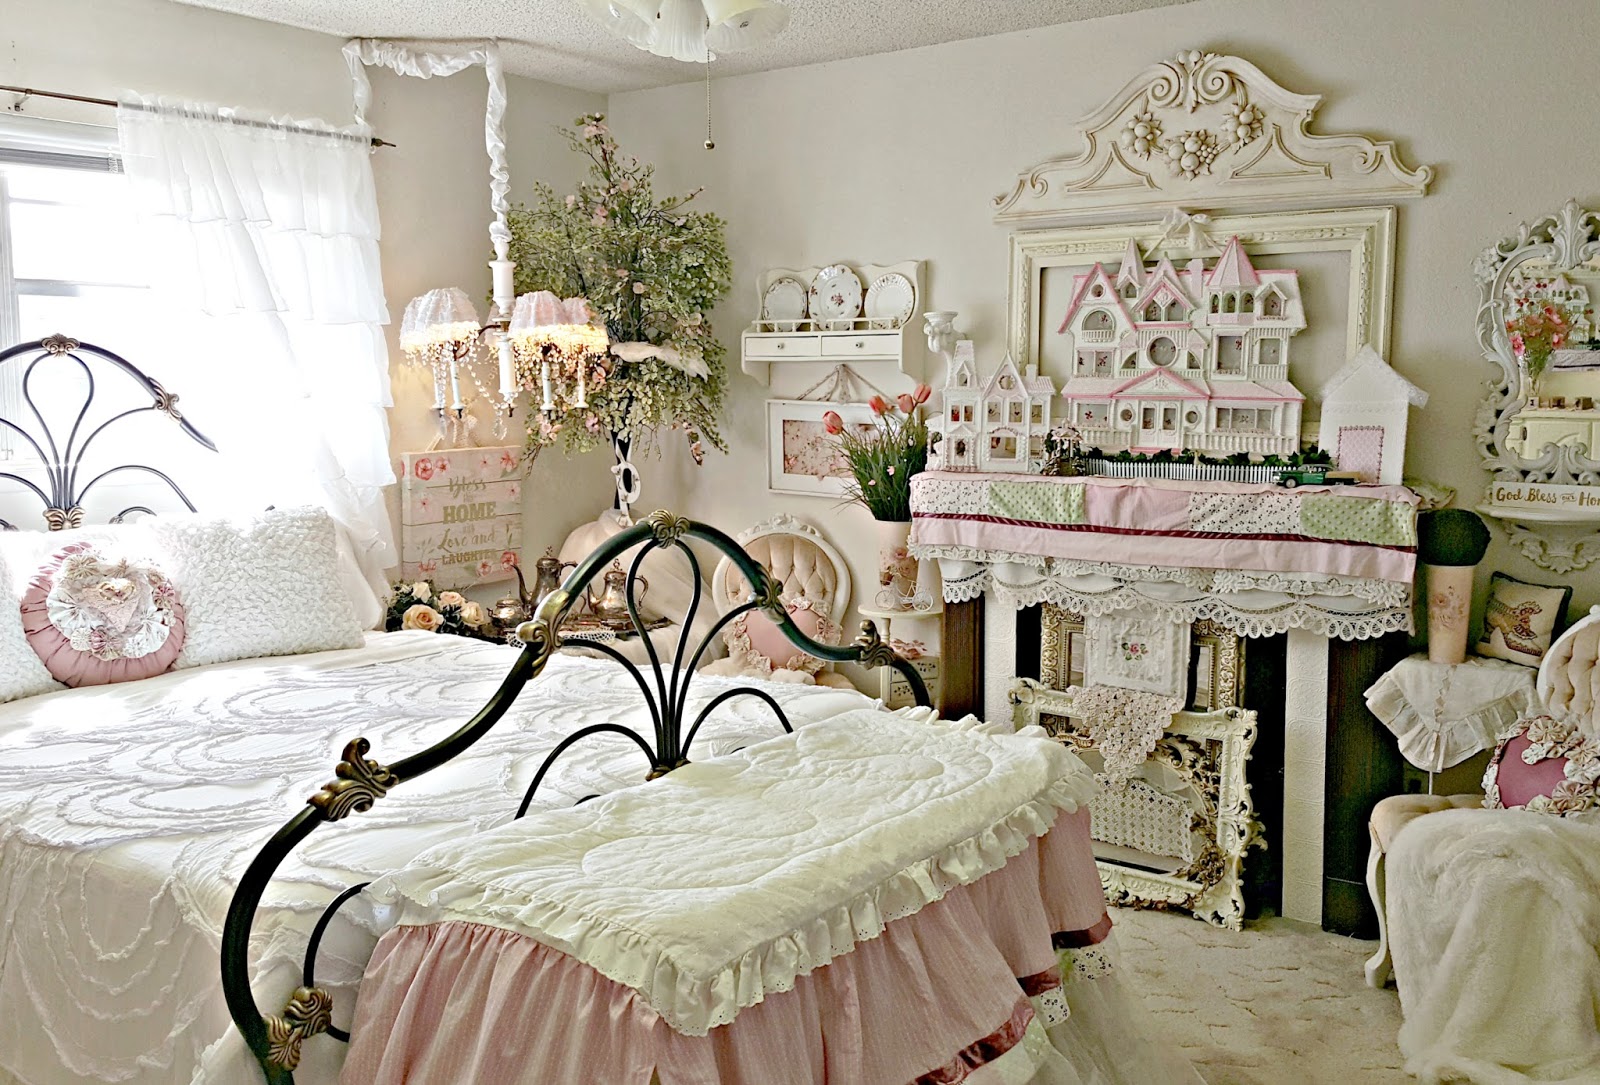 Penny\'s Vintage Home: New Decor in the Master Bedroom